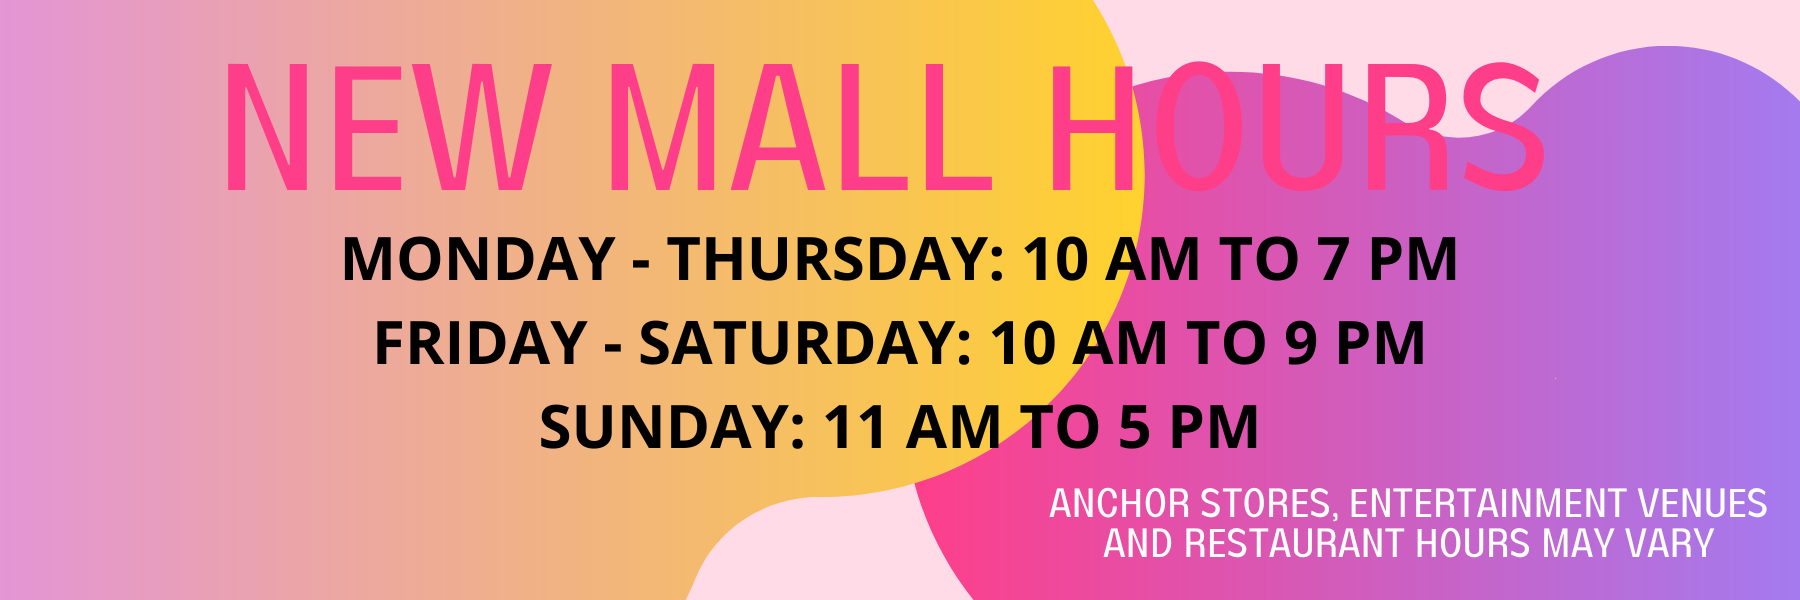 NEW MALL HOURS 2 1